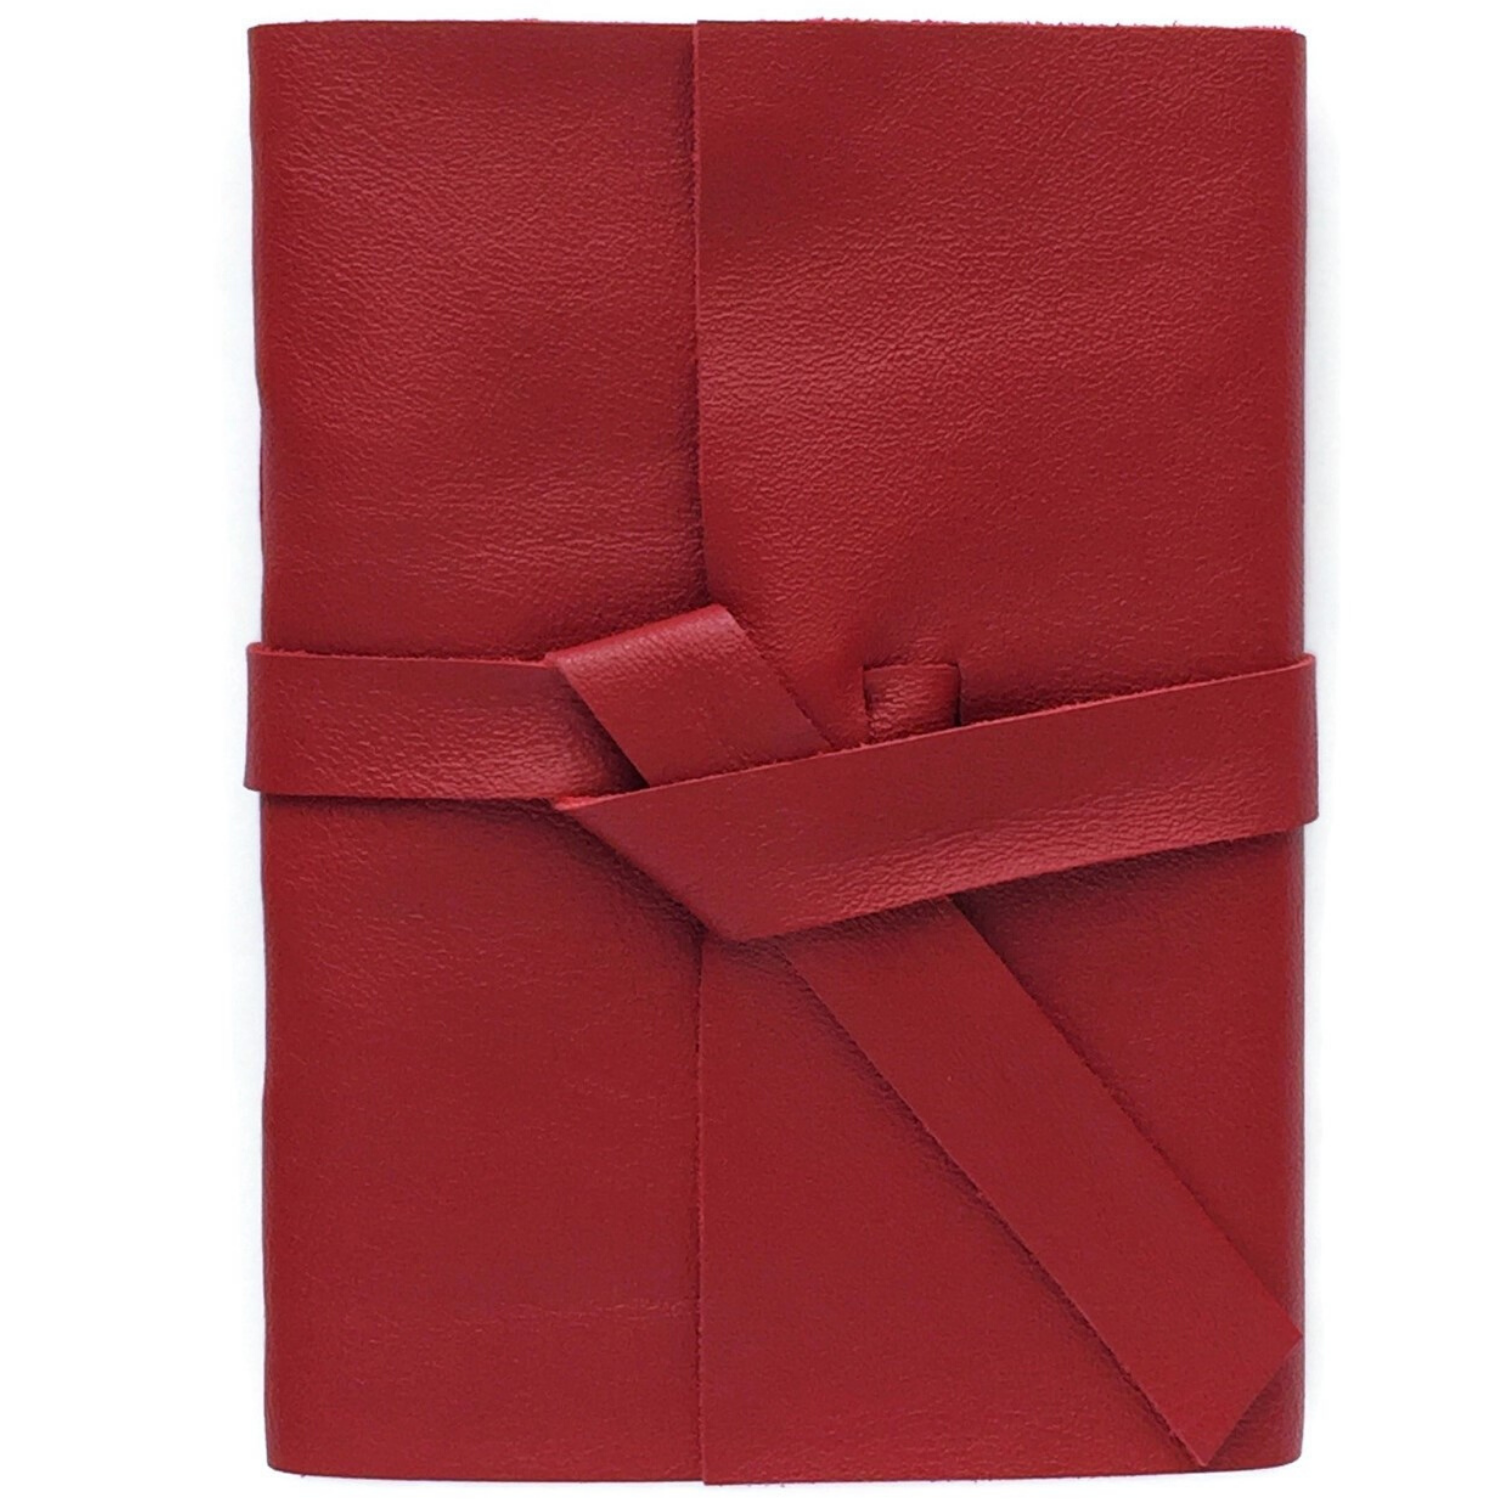 Unlined Leather Sketchbook - Deep Red - Choose Your Size: 5x7